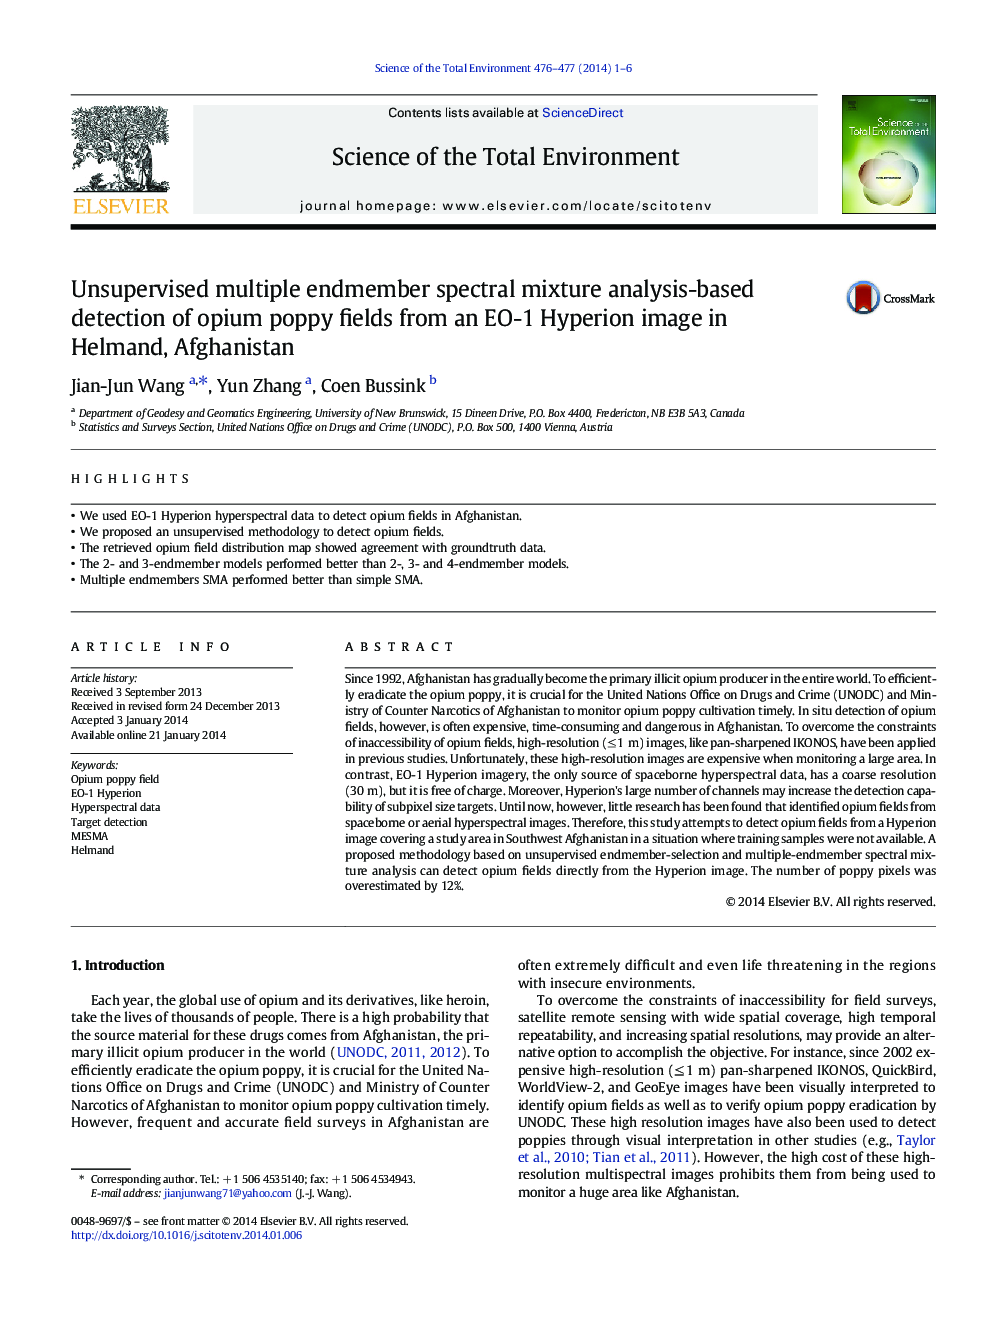 Unsupervised multiple endmember spectral mixture analysis-based detection of opium poppy fields from an EO-1 Hyperion image in Helmand, Afghanistan